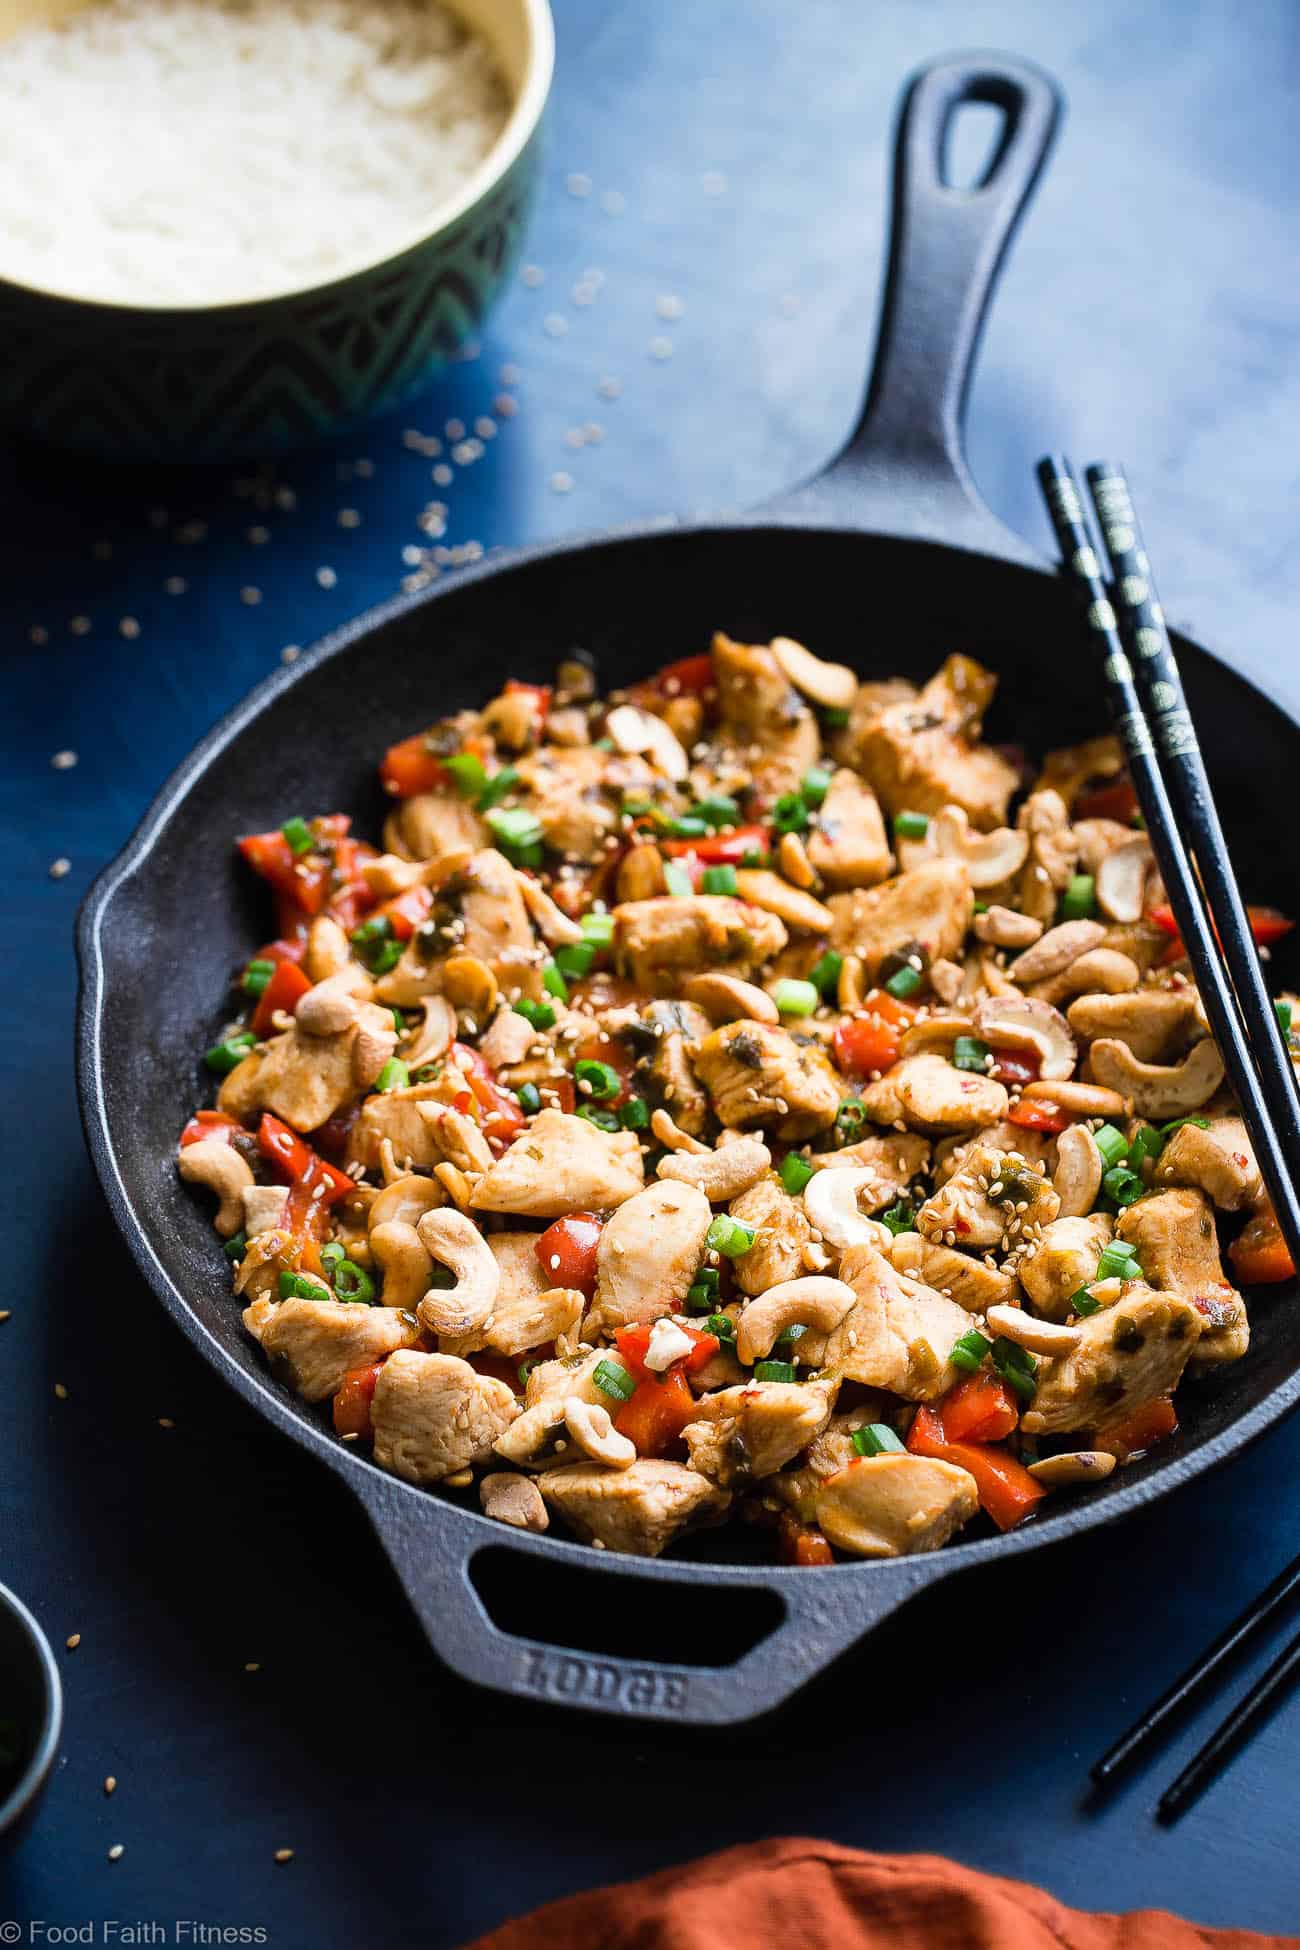 Easy Paleo Cashew Chicken Stir Fry - A healthy, gluten, grain and dairy free weeknight meal that the whole family will love! Ready in 20 minutes and WAY better than takeout! | #Foodfaithfitness | #Paleo #Glutenfree #Healthy #StirFry #Dairyfree